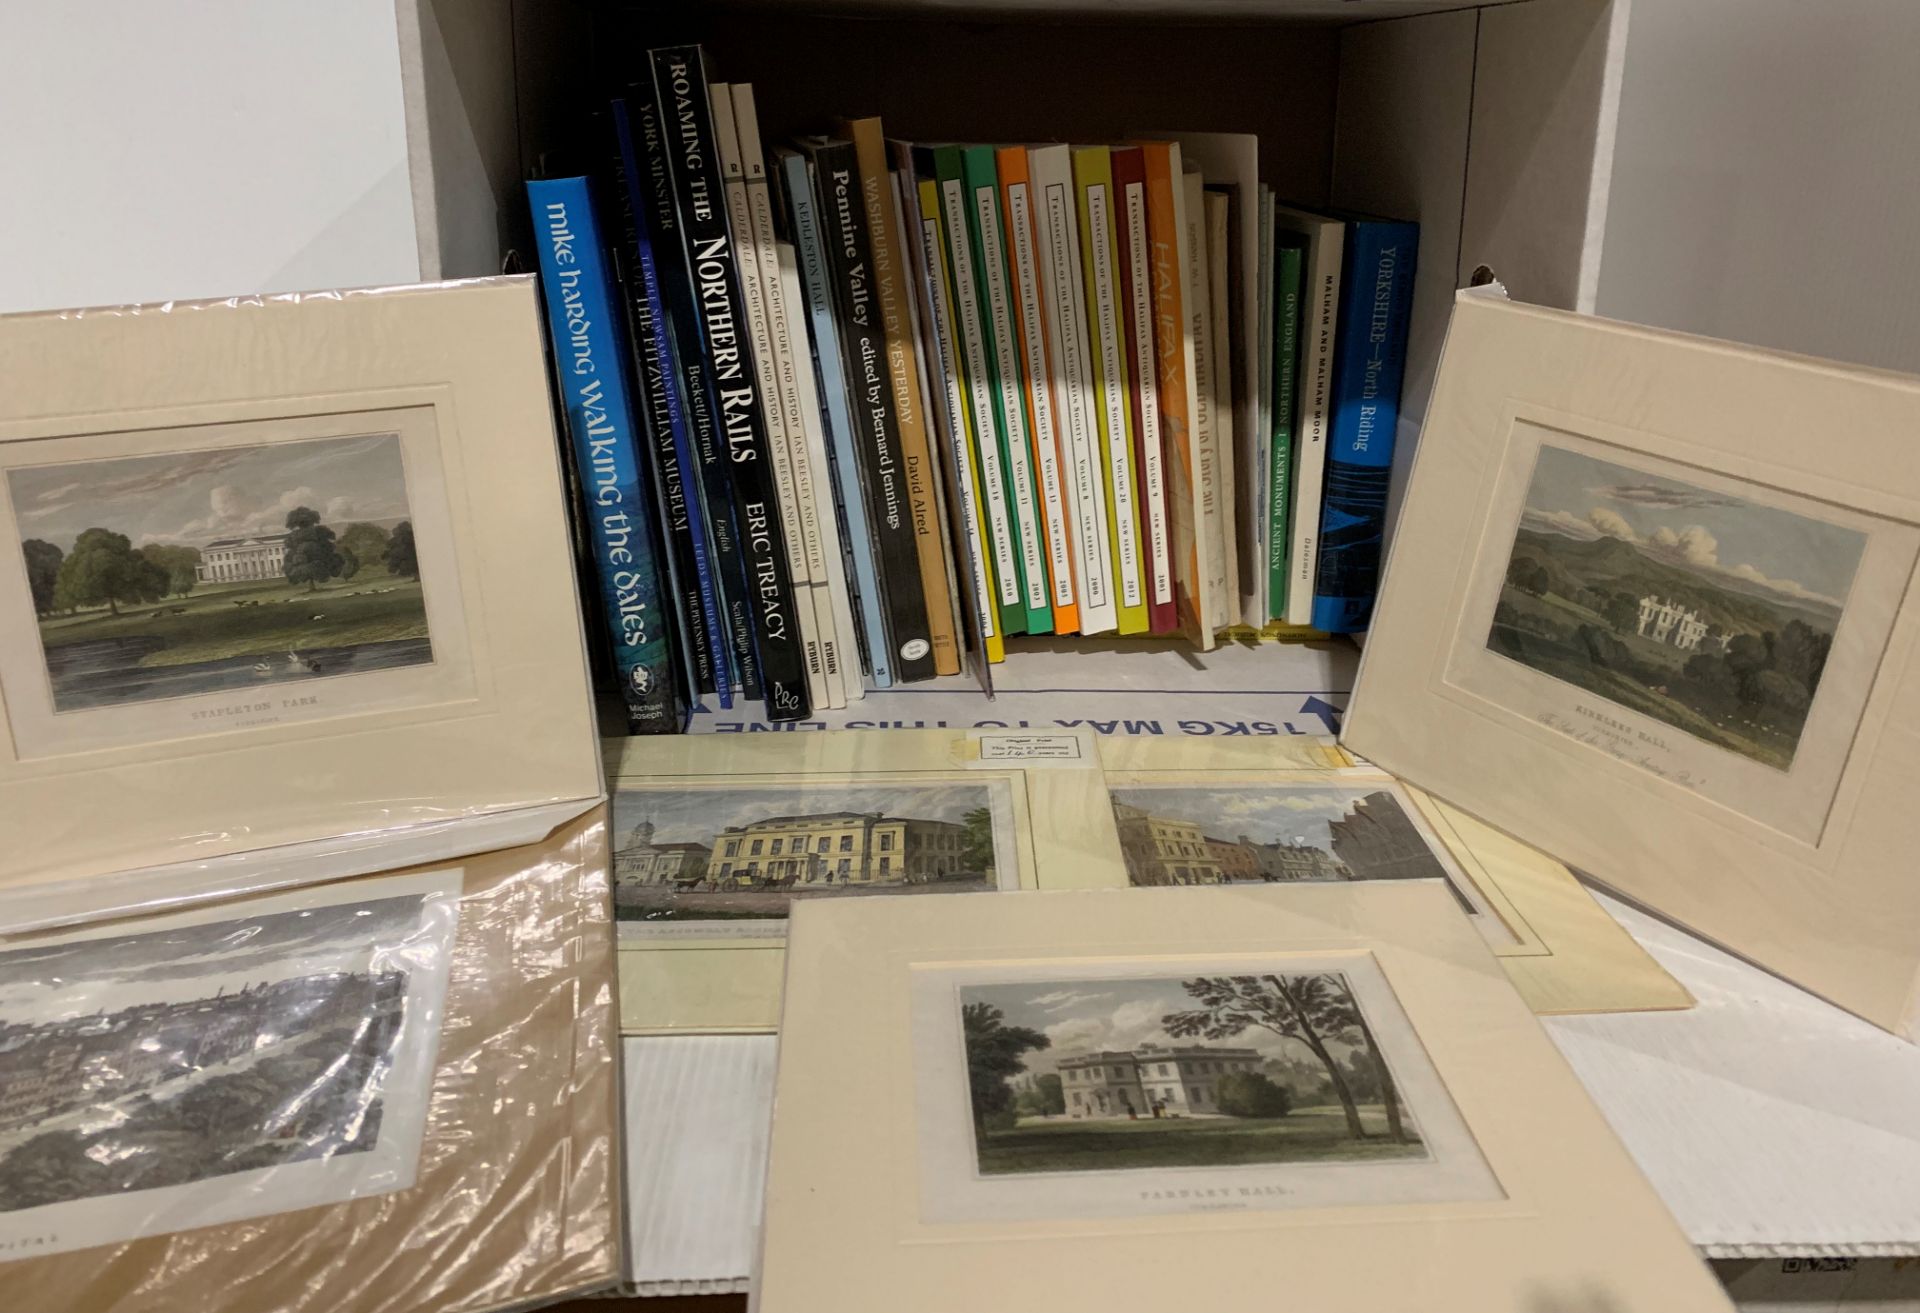 Contents to box - books relating to Yorkshire, Halifax, Pennines etc.